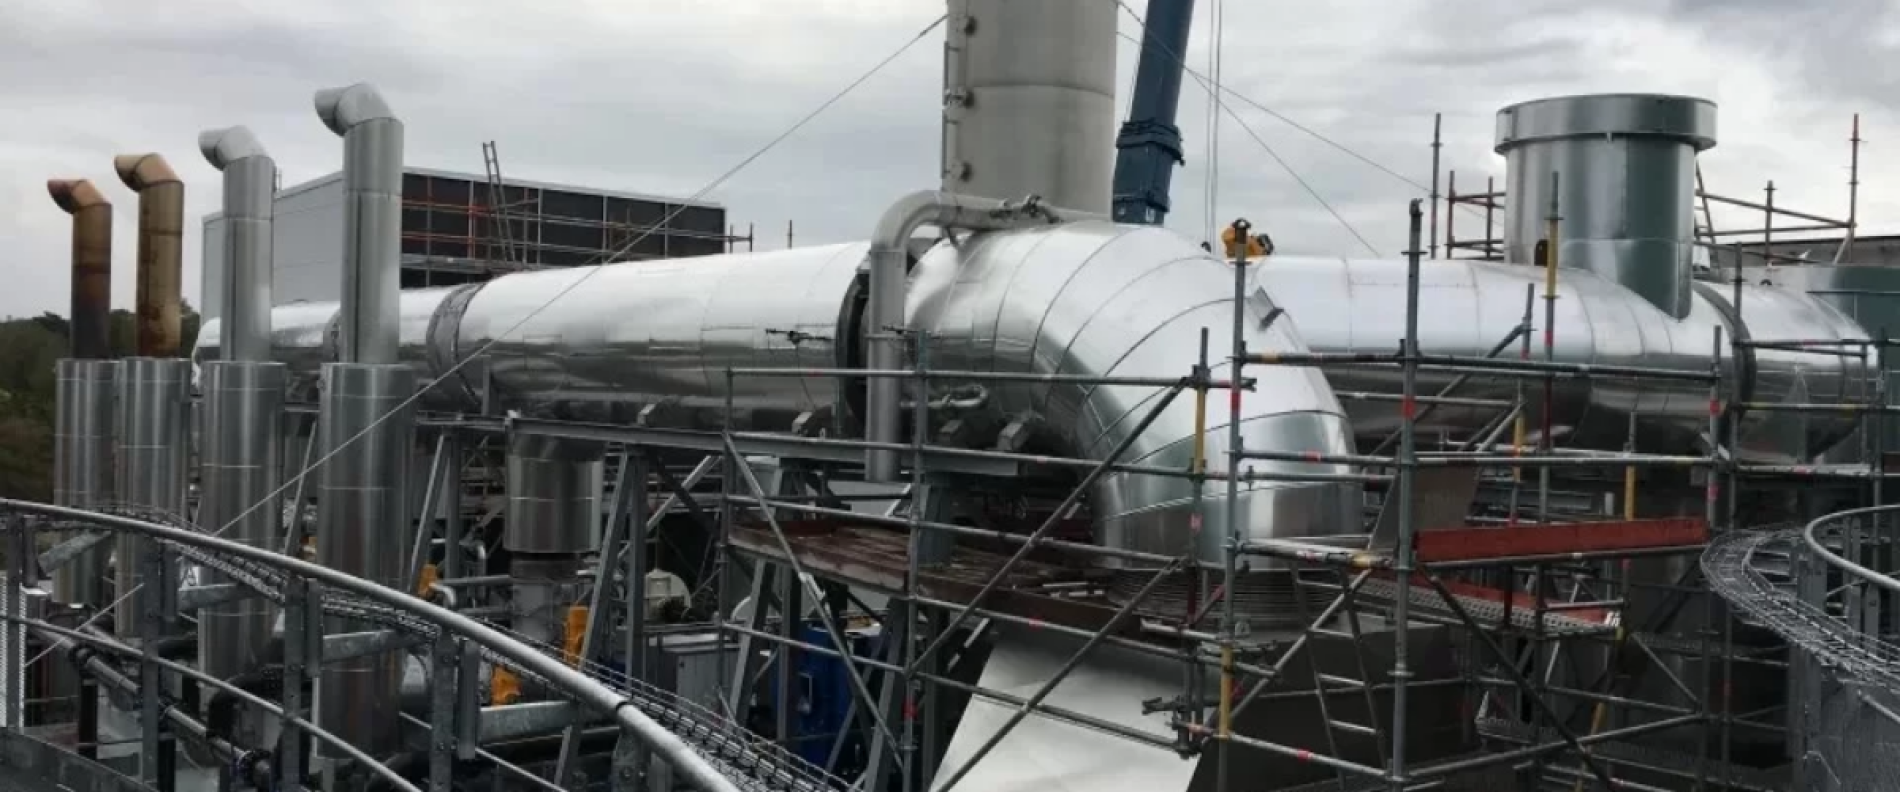 Overview of the exhaust gas ducting system